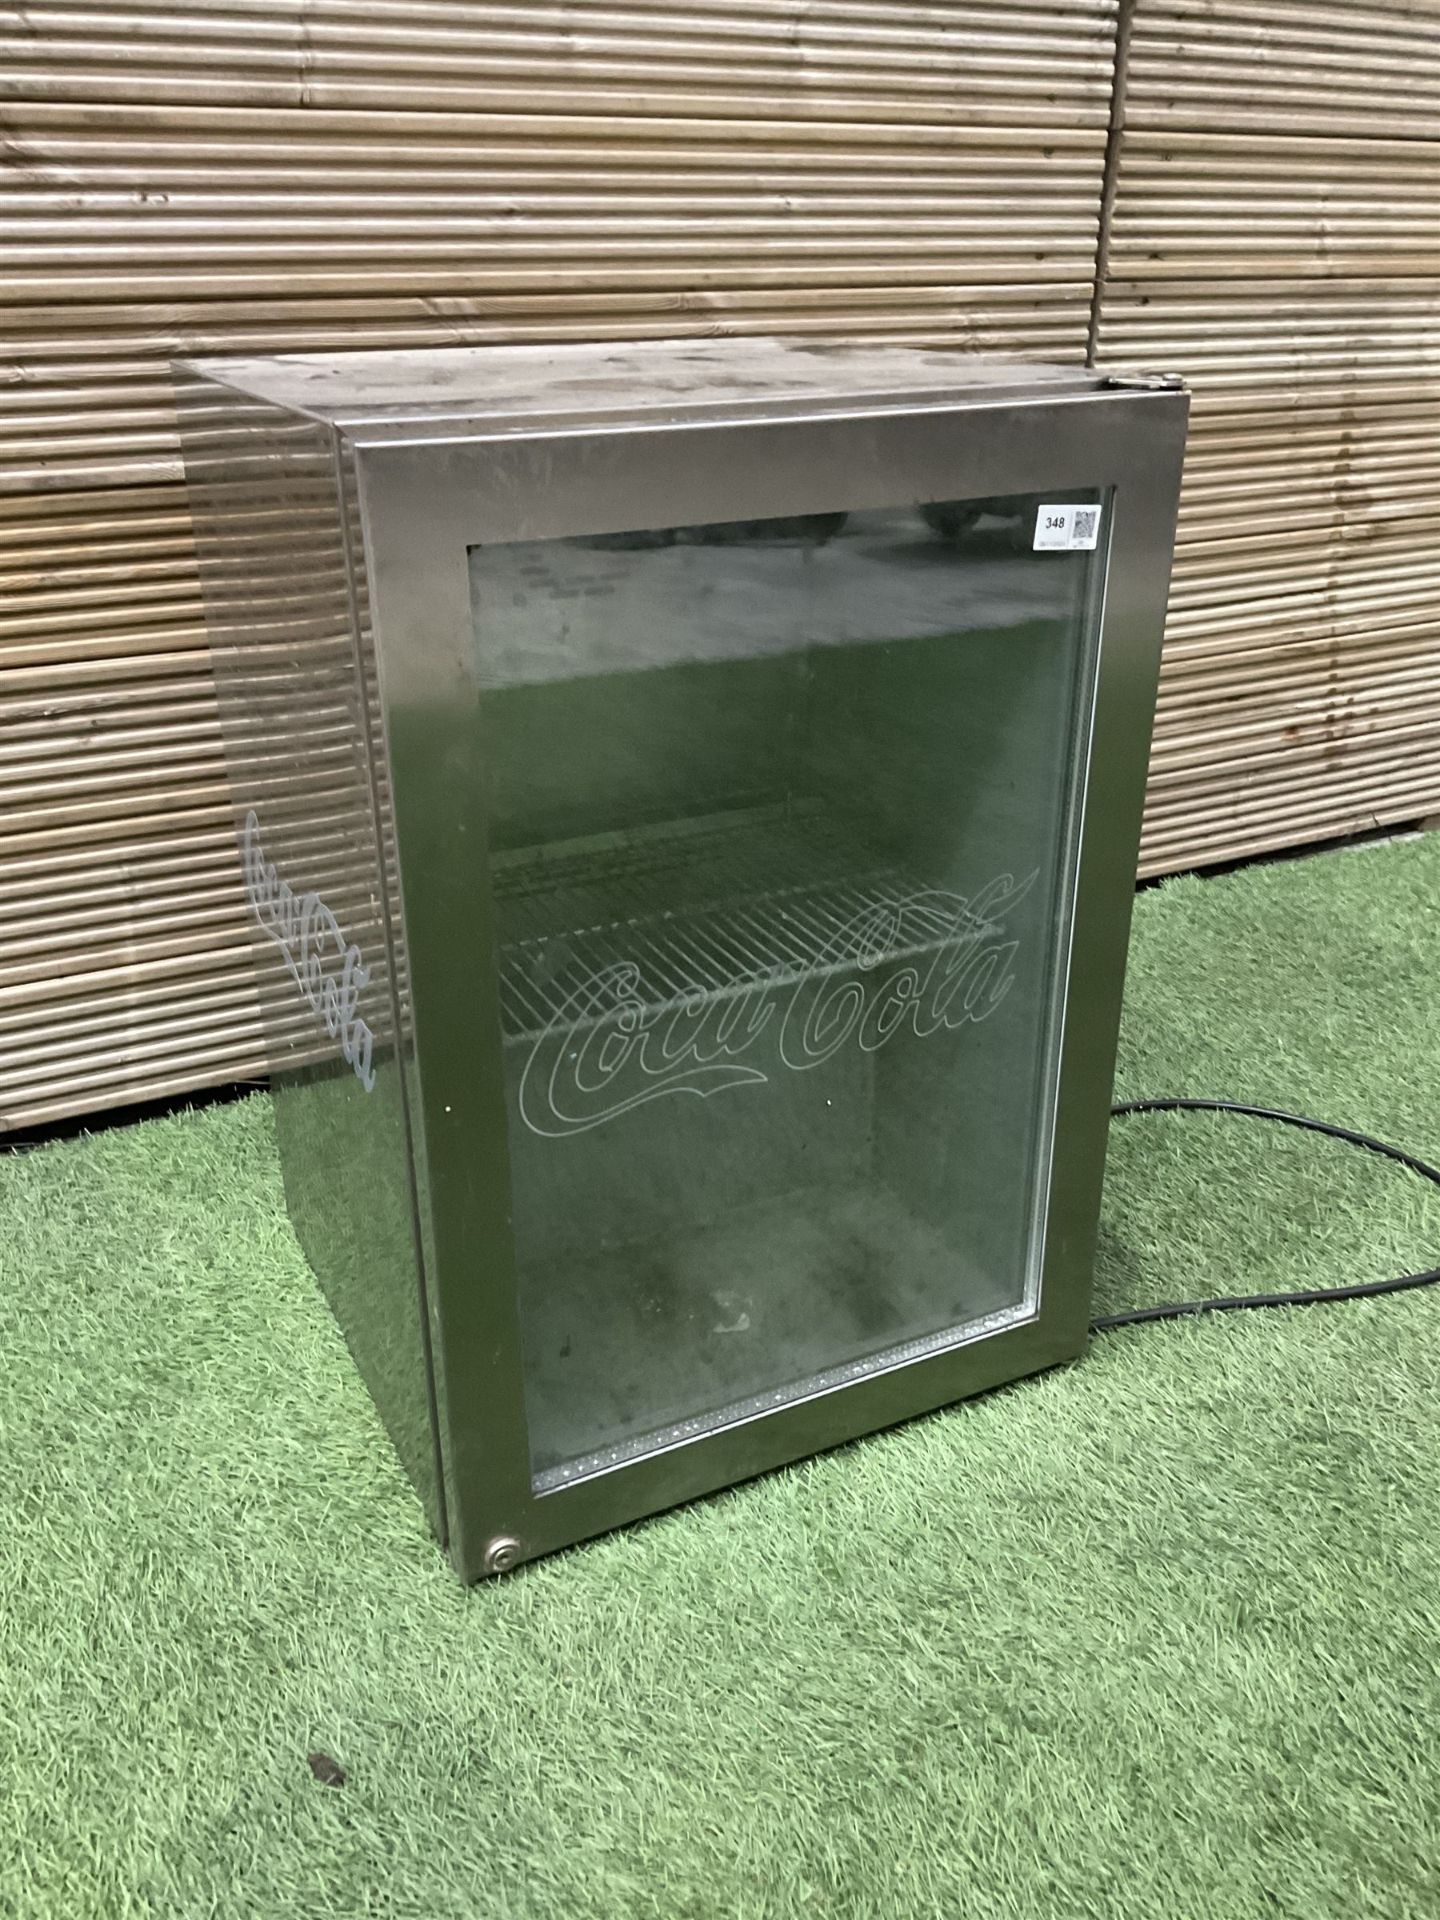 CocaCola stainless steel see trough mini fridge - THIS LOT IS TO BE COLLECTED BY APPOINTMENT FROM D - Image 5 of 8